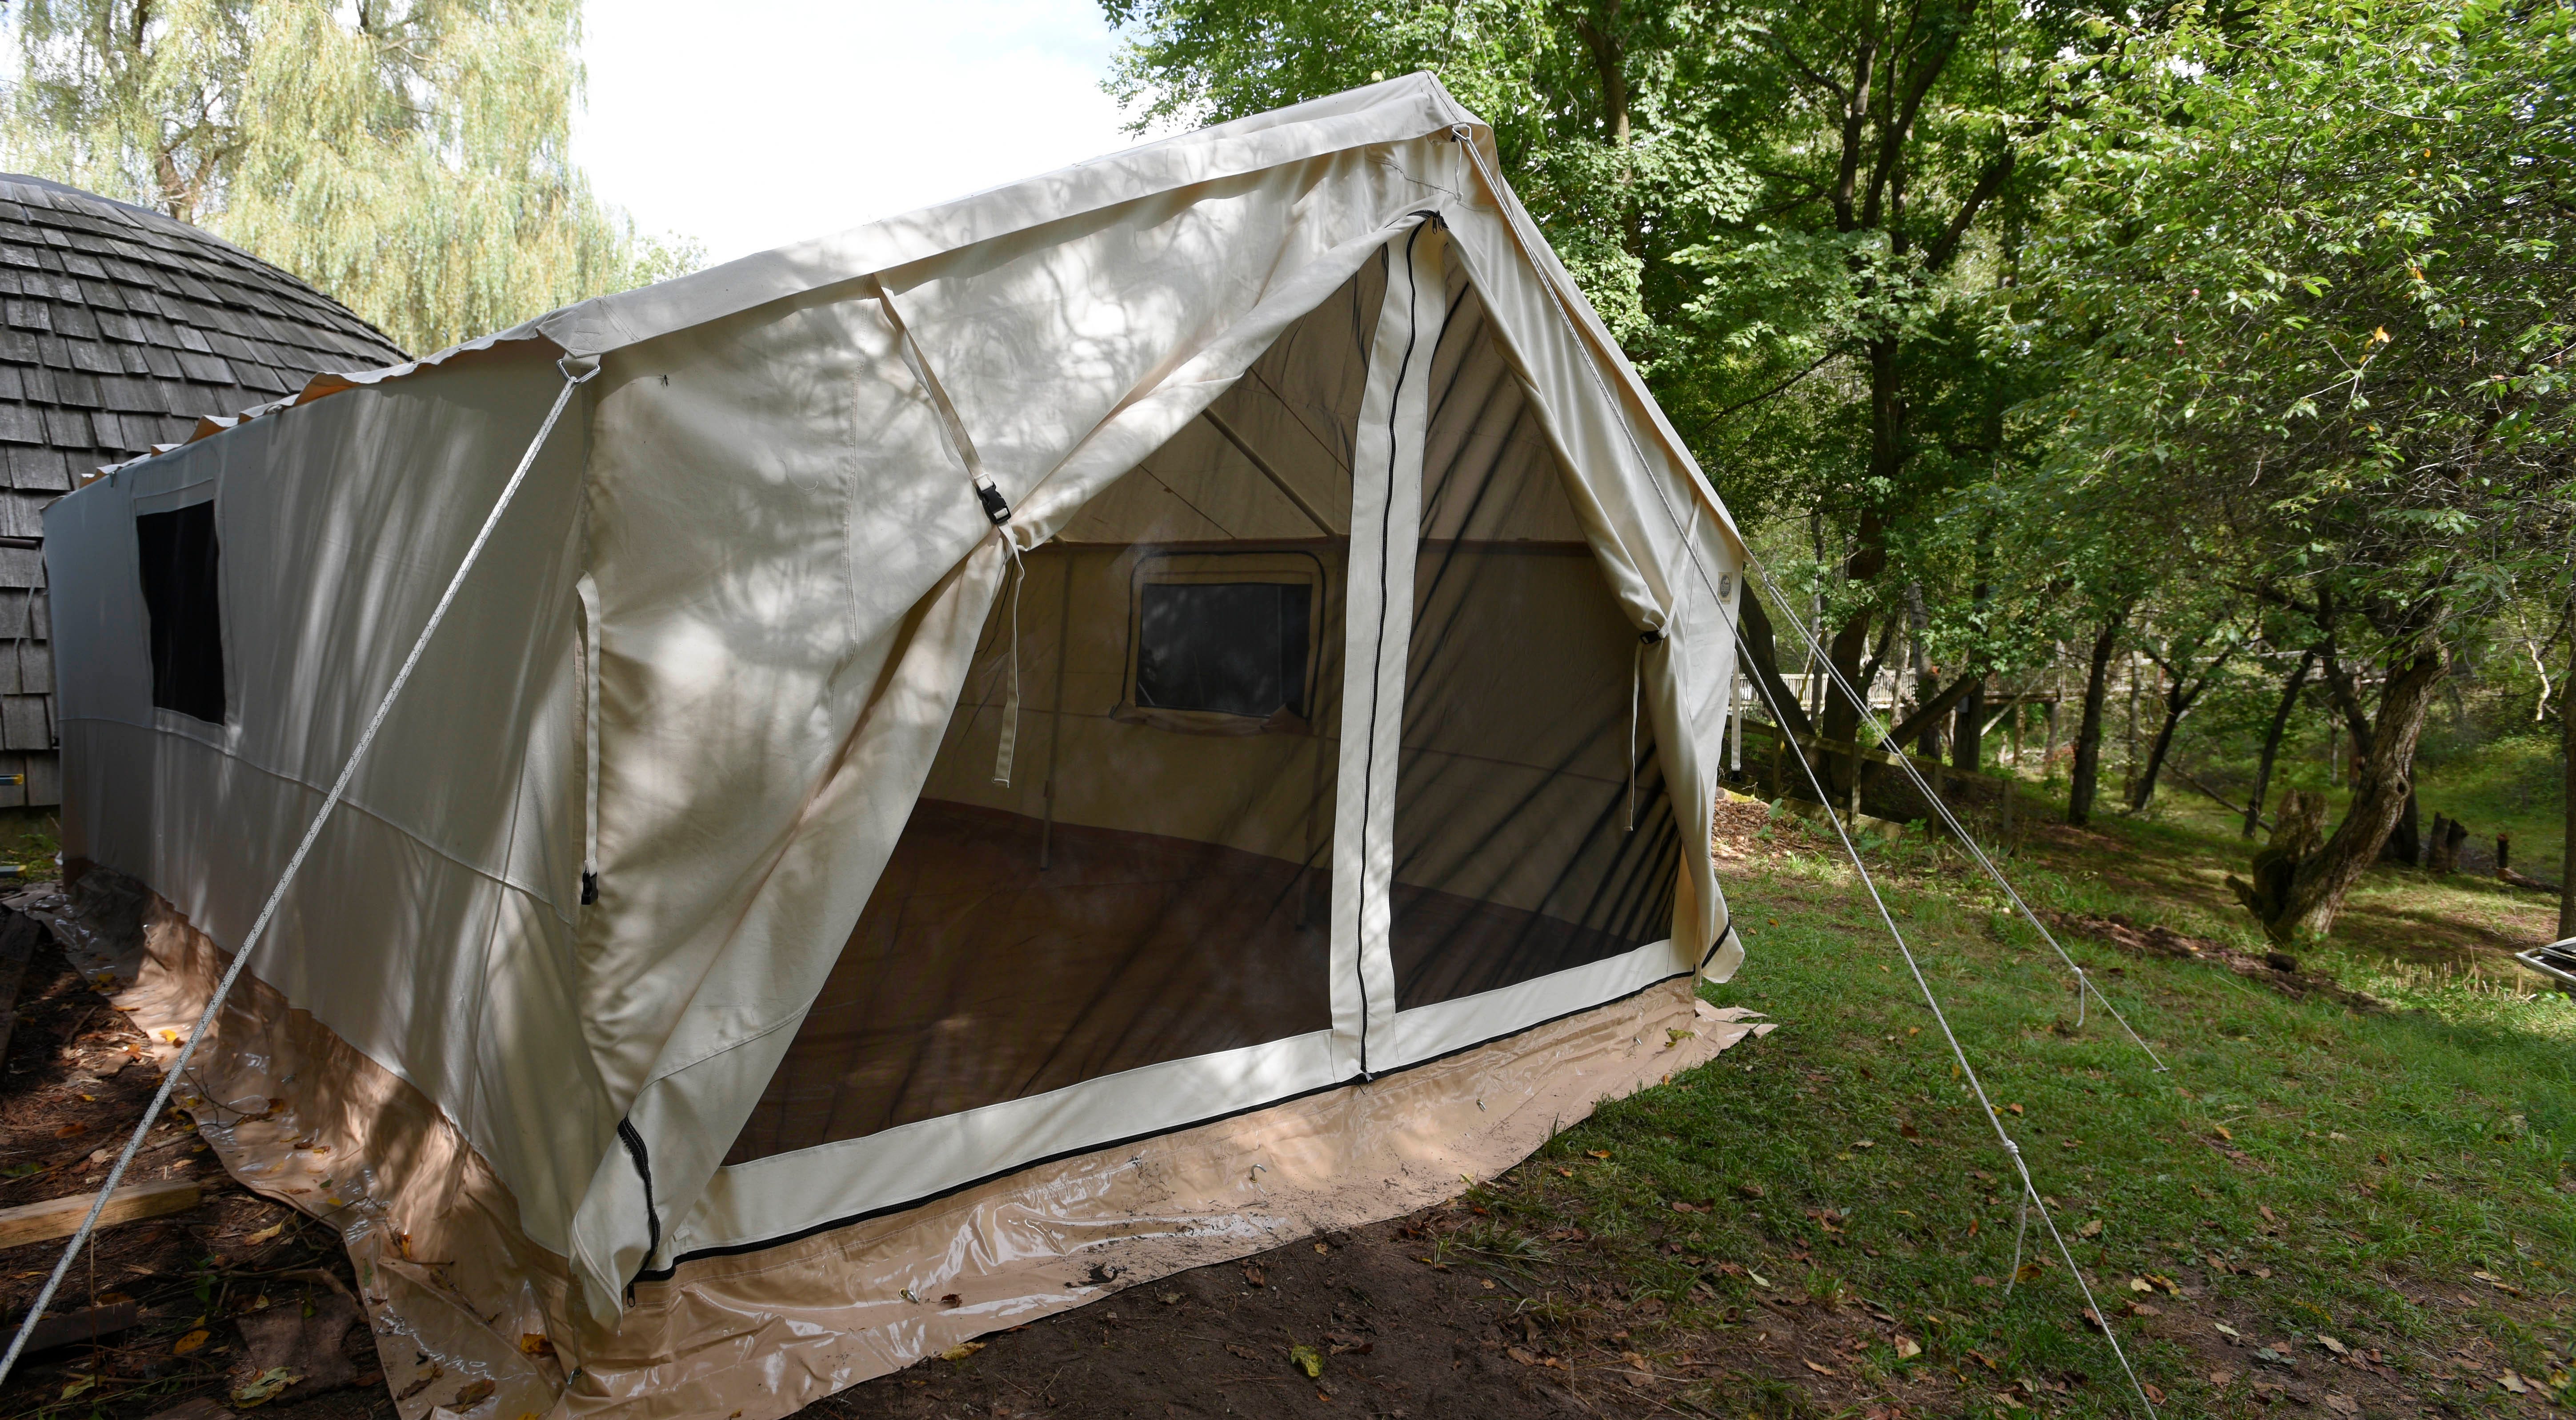 This is one of the new 12-foot by 32-foot, heavy-duty canvass, four-season tents that is raised off the ground. These tents will replace the old Army tents currently in use.